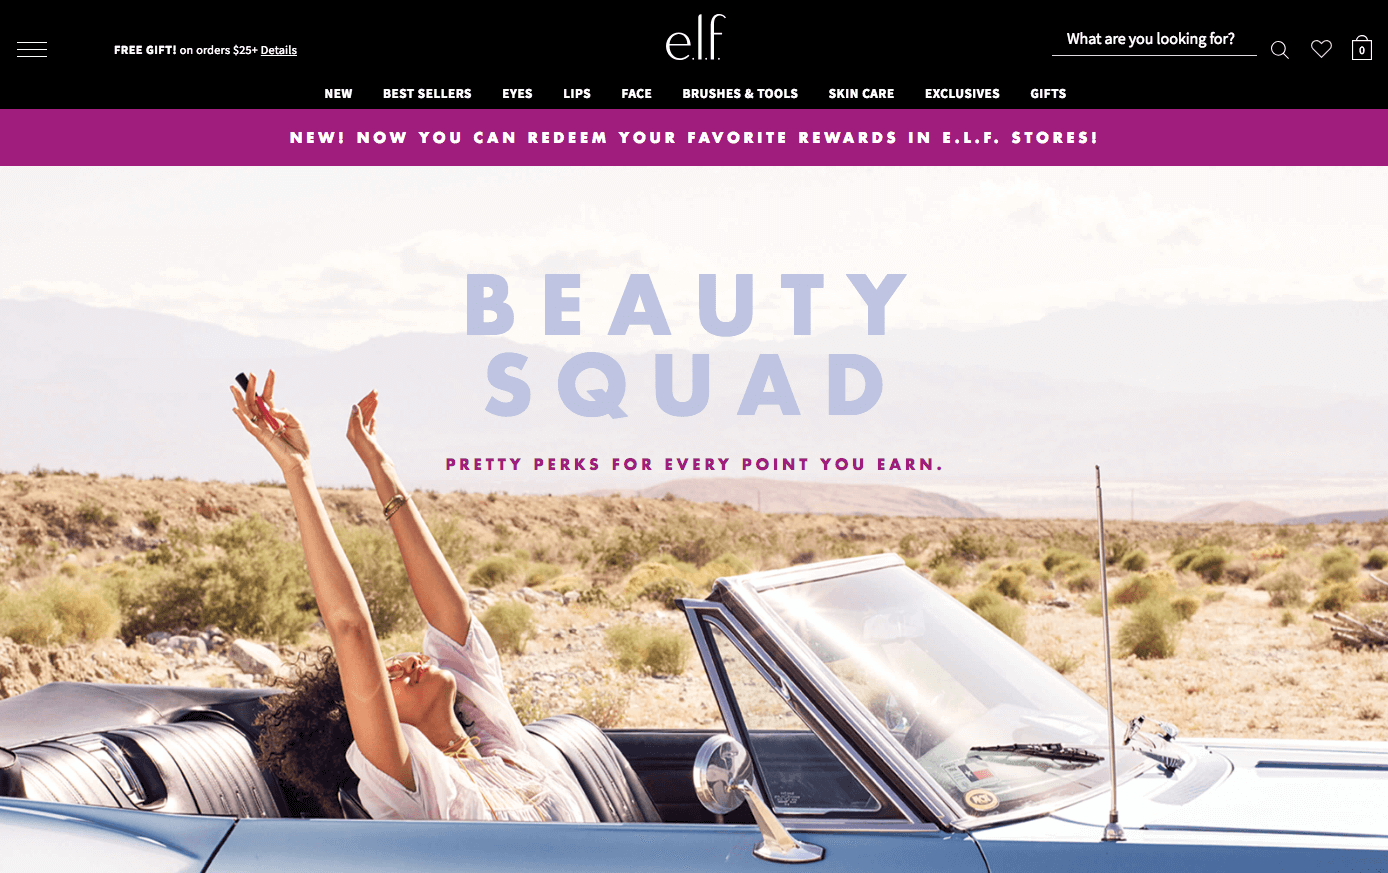 The Best eCommerce Loyalty Programs - elf beauty squad